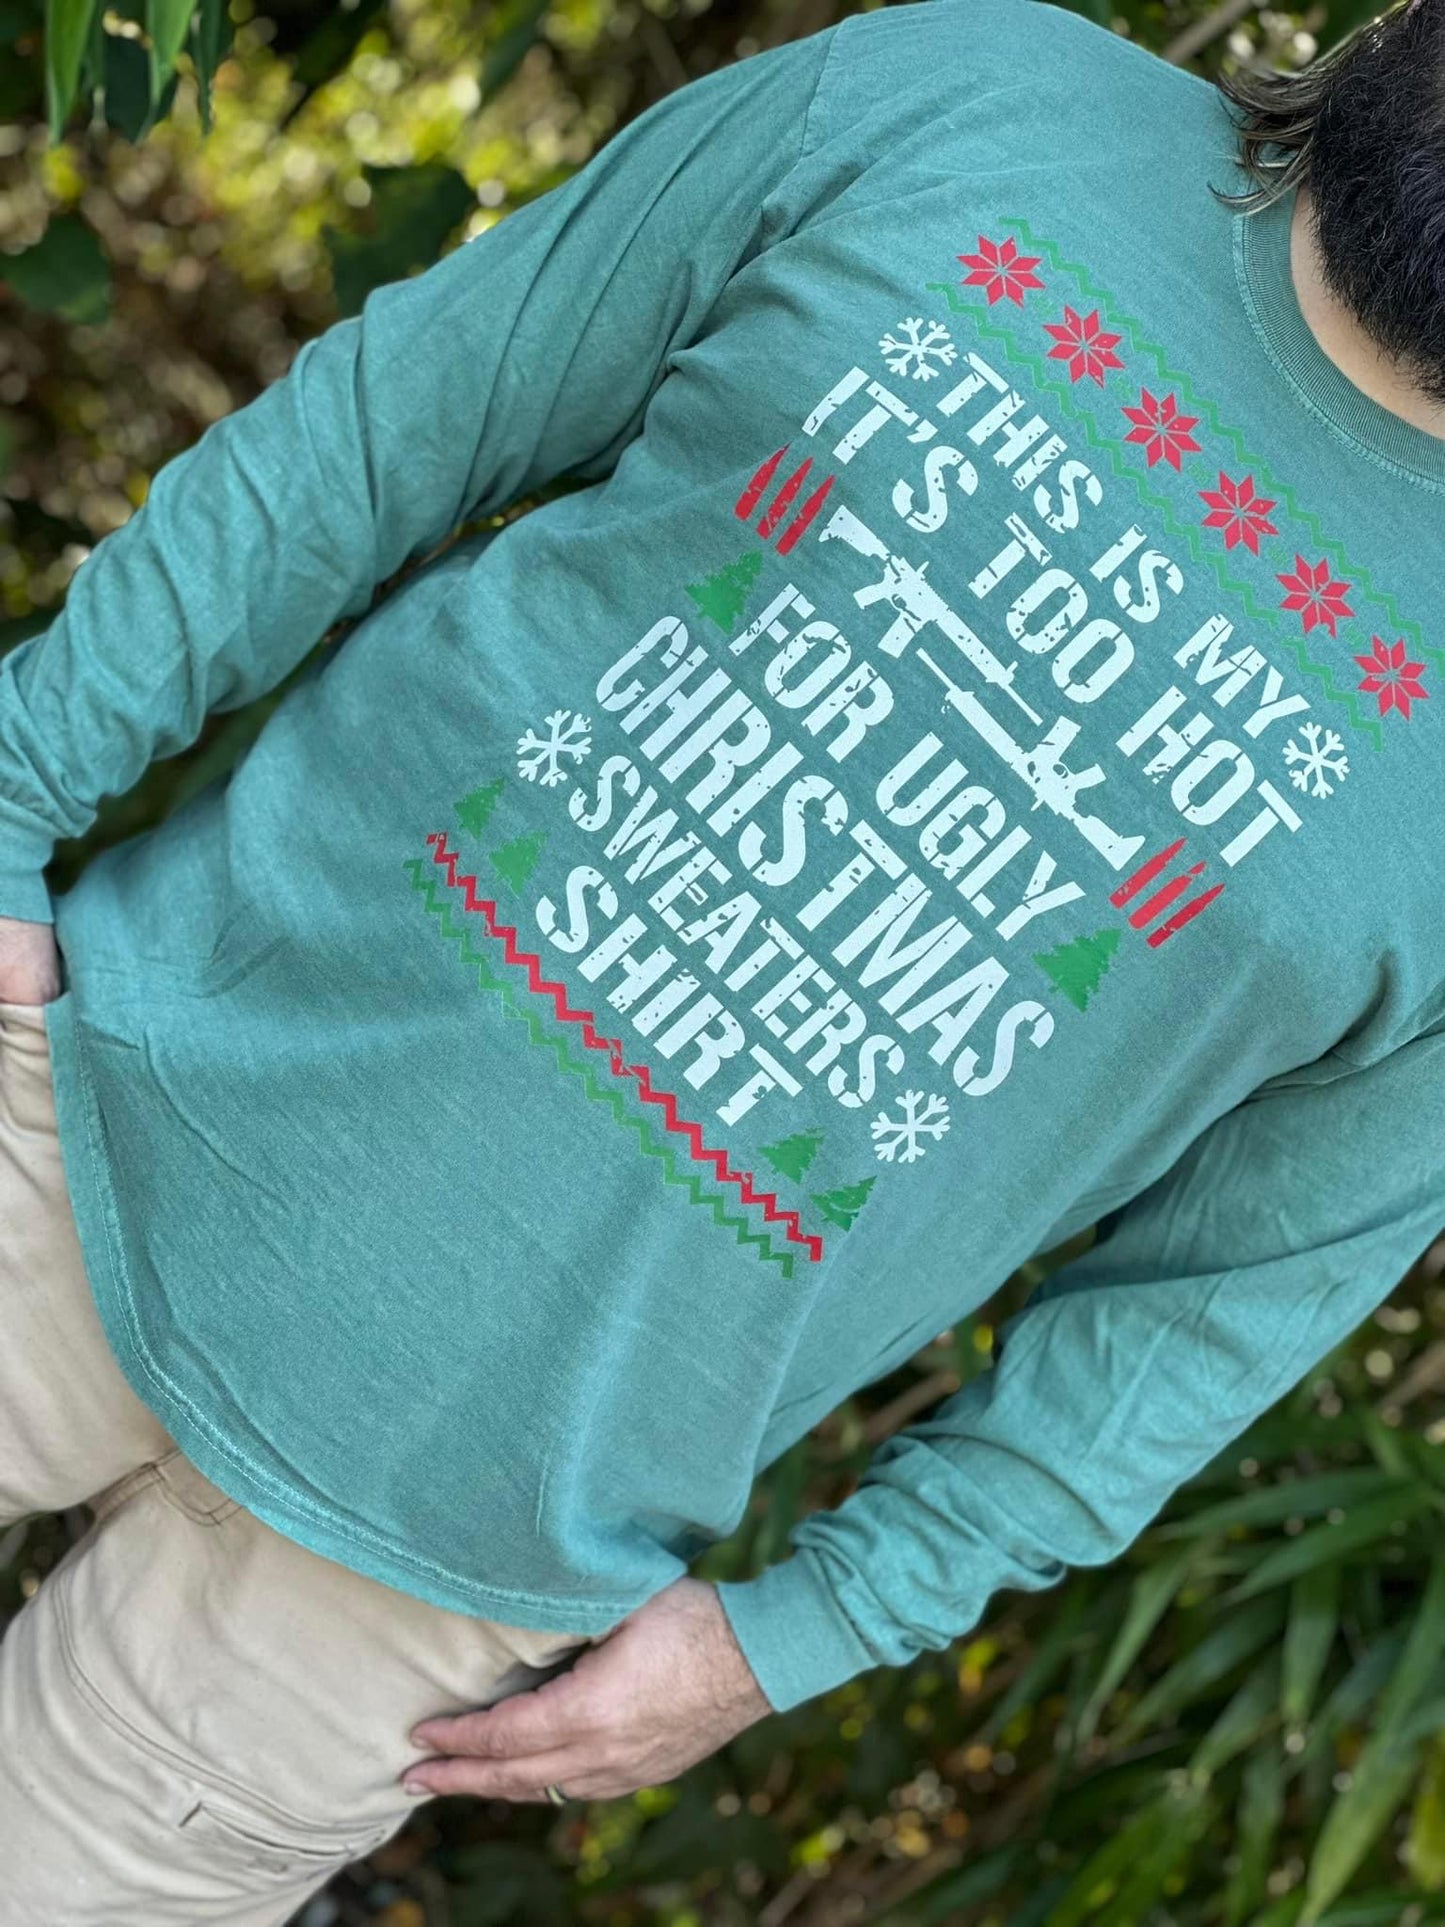 It's too hot for an ugly Christmas sweater